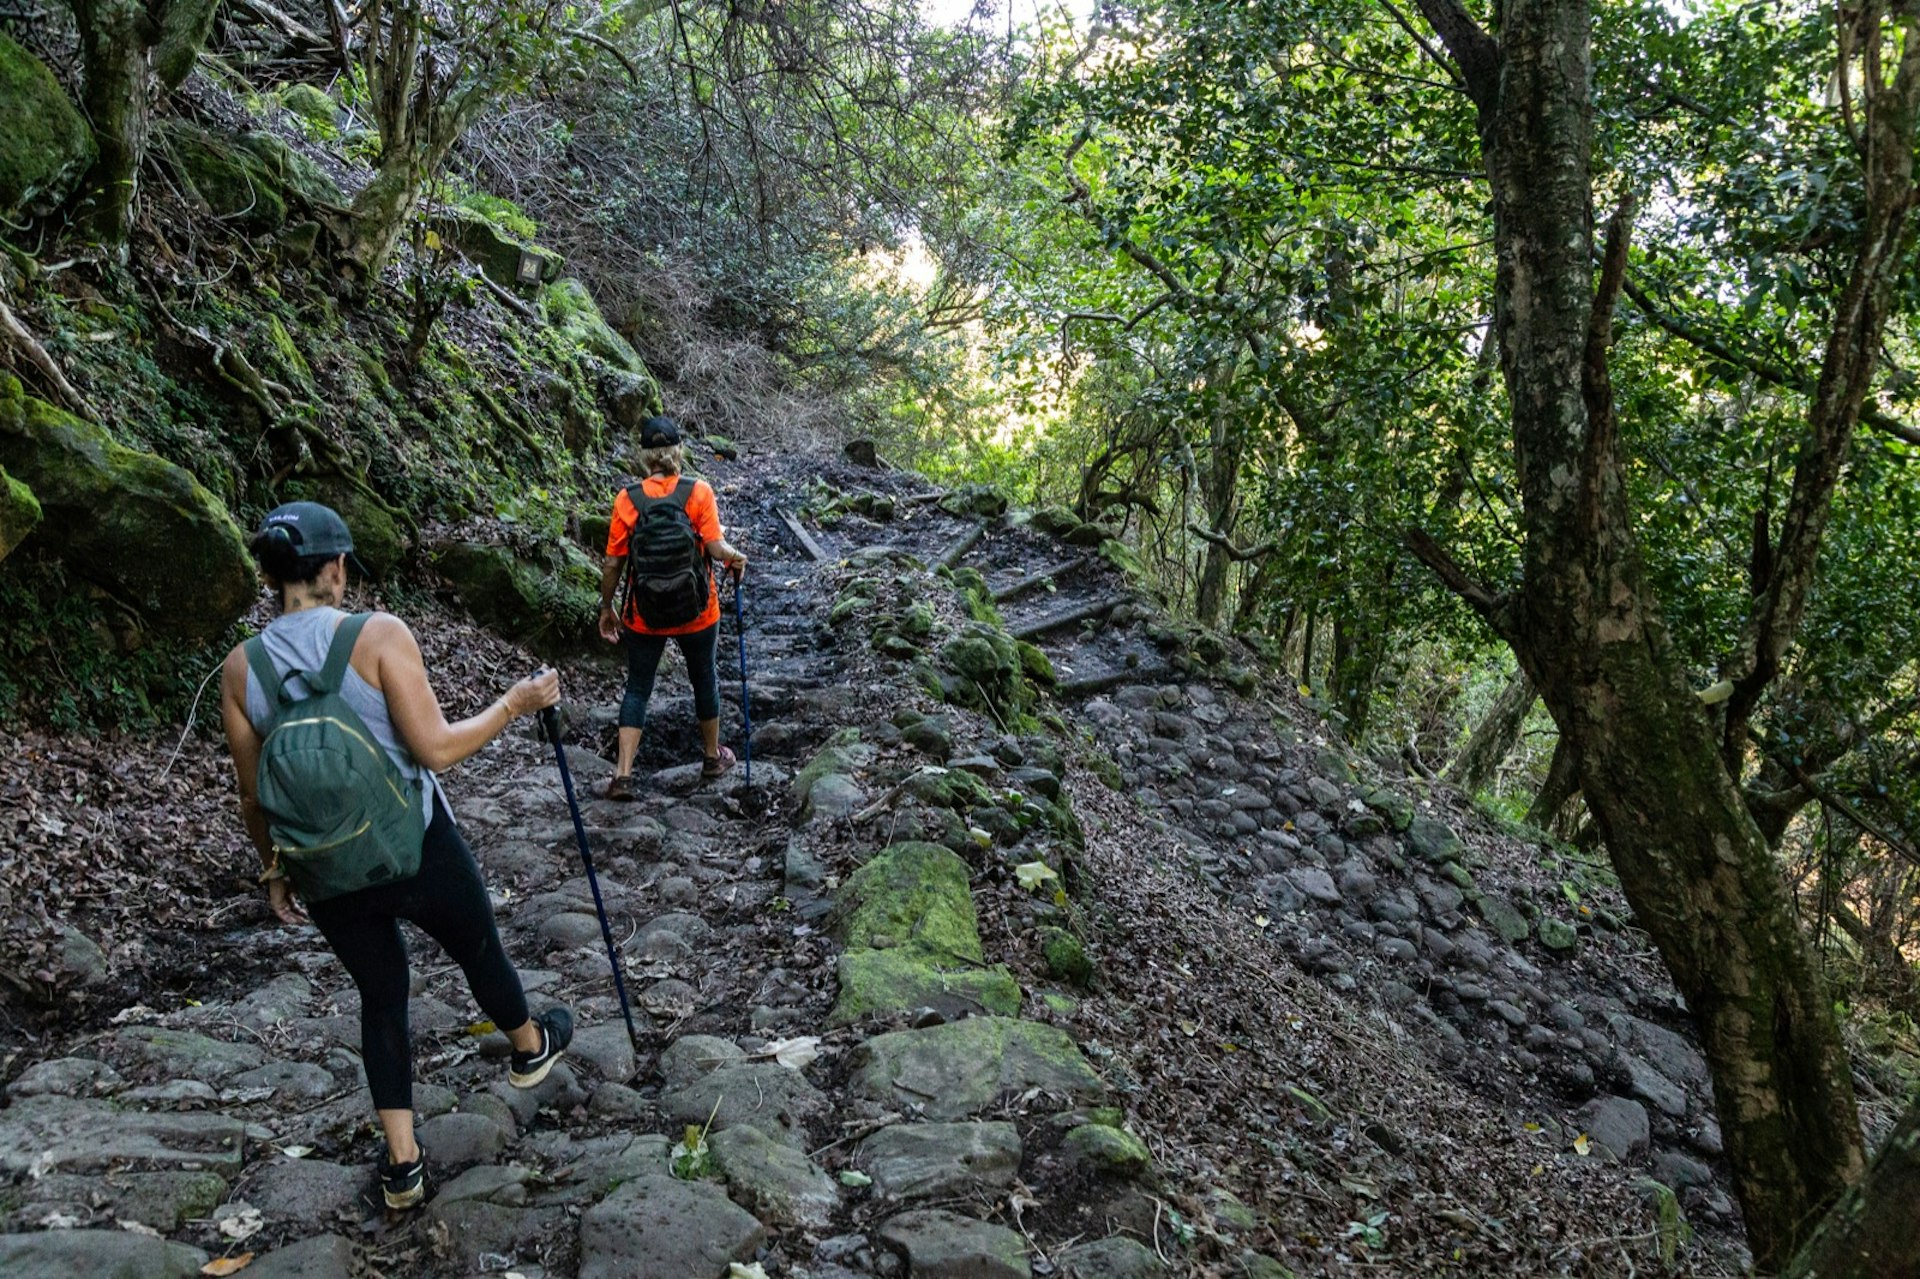 A steep, stony switchback curves down a tropical jungle cliff as two hikers descend to the Kalaupapa peninsula.